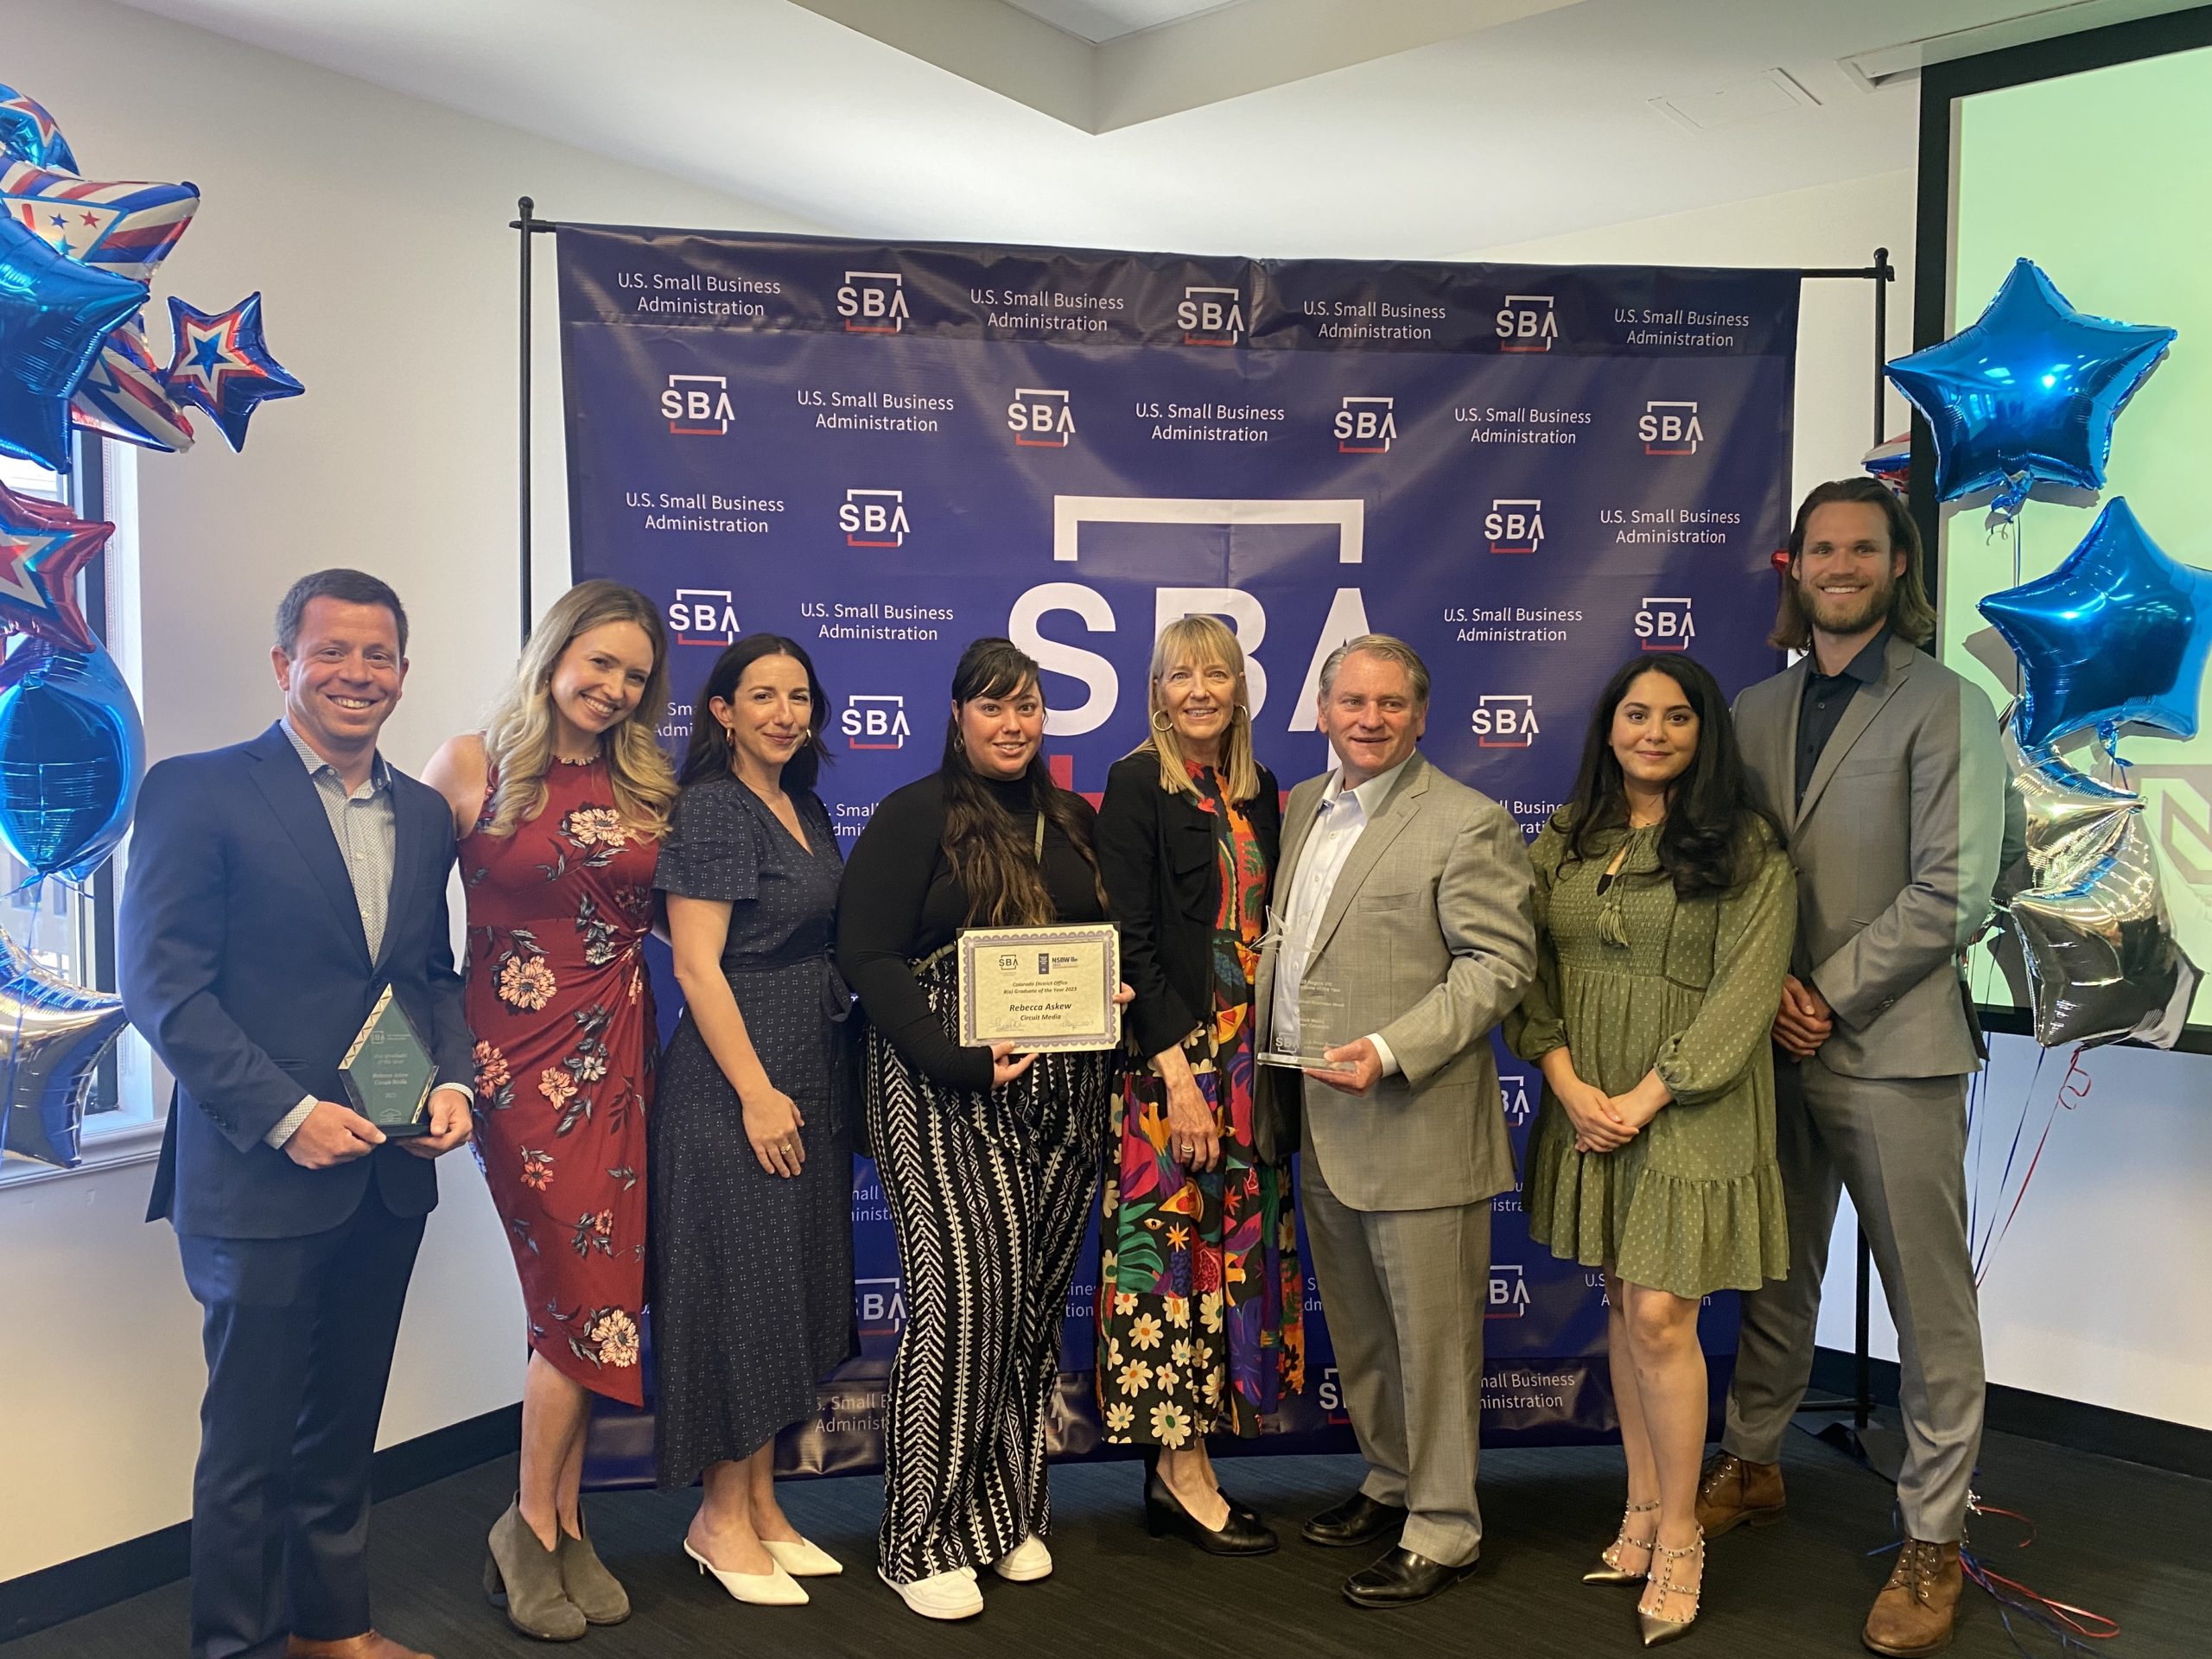 From left to right: Nick Eckerman, Ali Manor, Lisa McKell, Jess Brovsky-Eaker, Rebecca Askew, Dean Morton, Anoud Saeed, and Jacob Hurley. The team is accepting the Regional and 8(a) Graduate of the Year awards at the SBA small business awards ceremony.